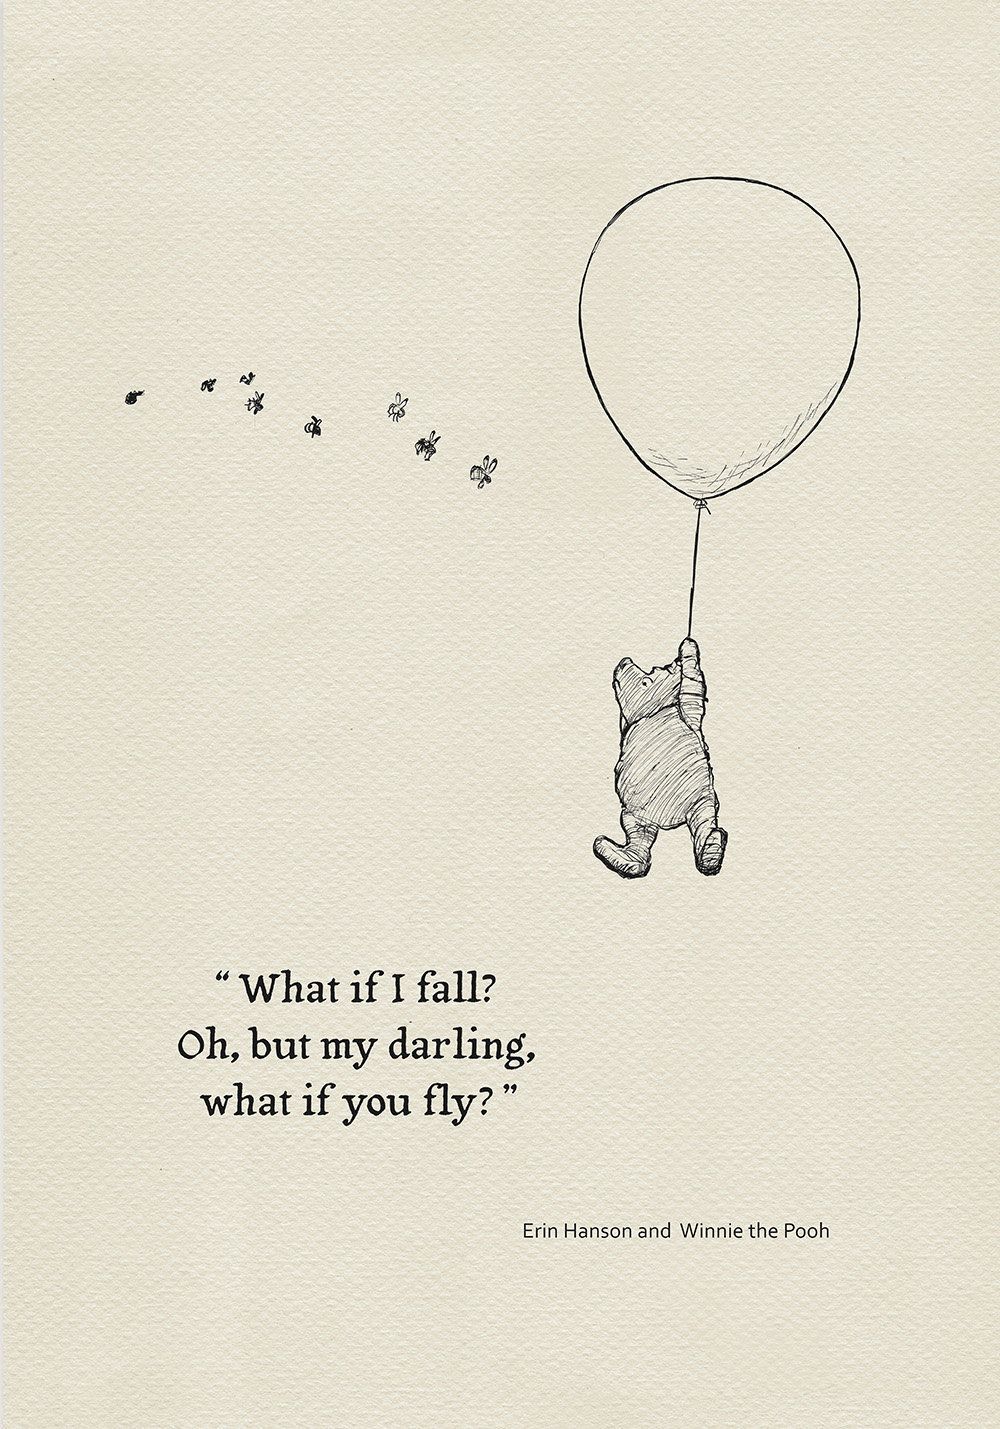 What if I fall? Oh,but my darling,what if you fly?- Quote poster Winnie the Pooh and Erin Hanson classic vintage style poster print #105 - What if I fall? Oh,but my darling,what if you fly?- Quote poster Winnie the Pooh and Erin Hanson classic vintage style poster print #105 -   vintage style Quotes